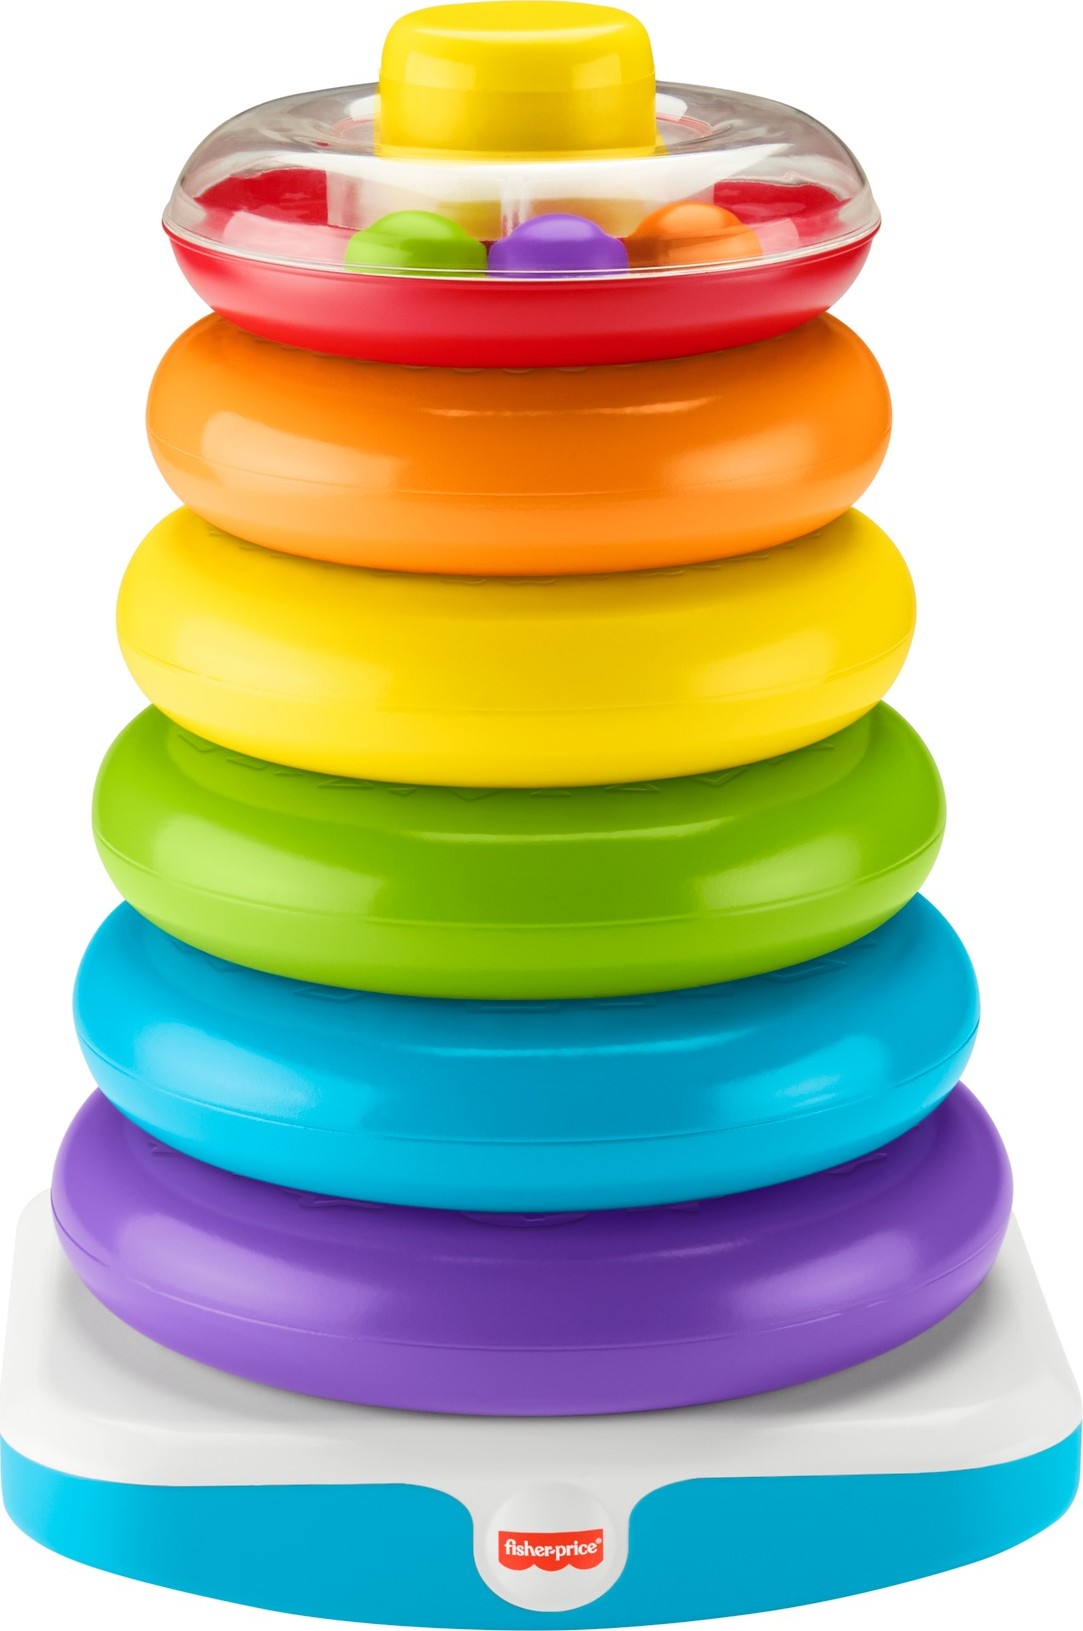 Fisher-Price Giant Rock-a-Stack Infant and Toddler Stacking Toy, 14+ Inches Tall, Baby Toy for 12 months and up - image 1 of 7